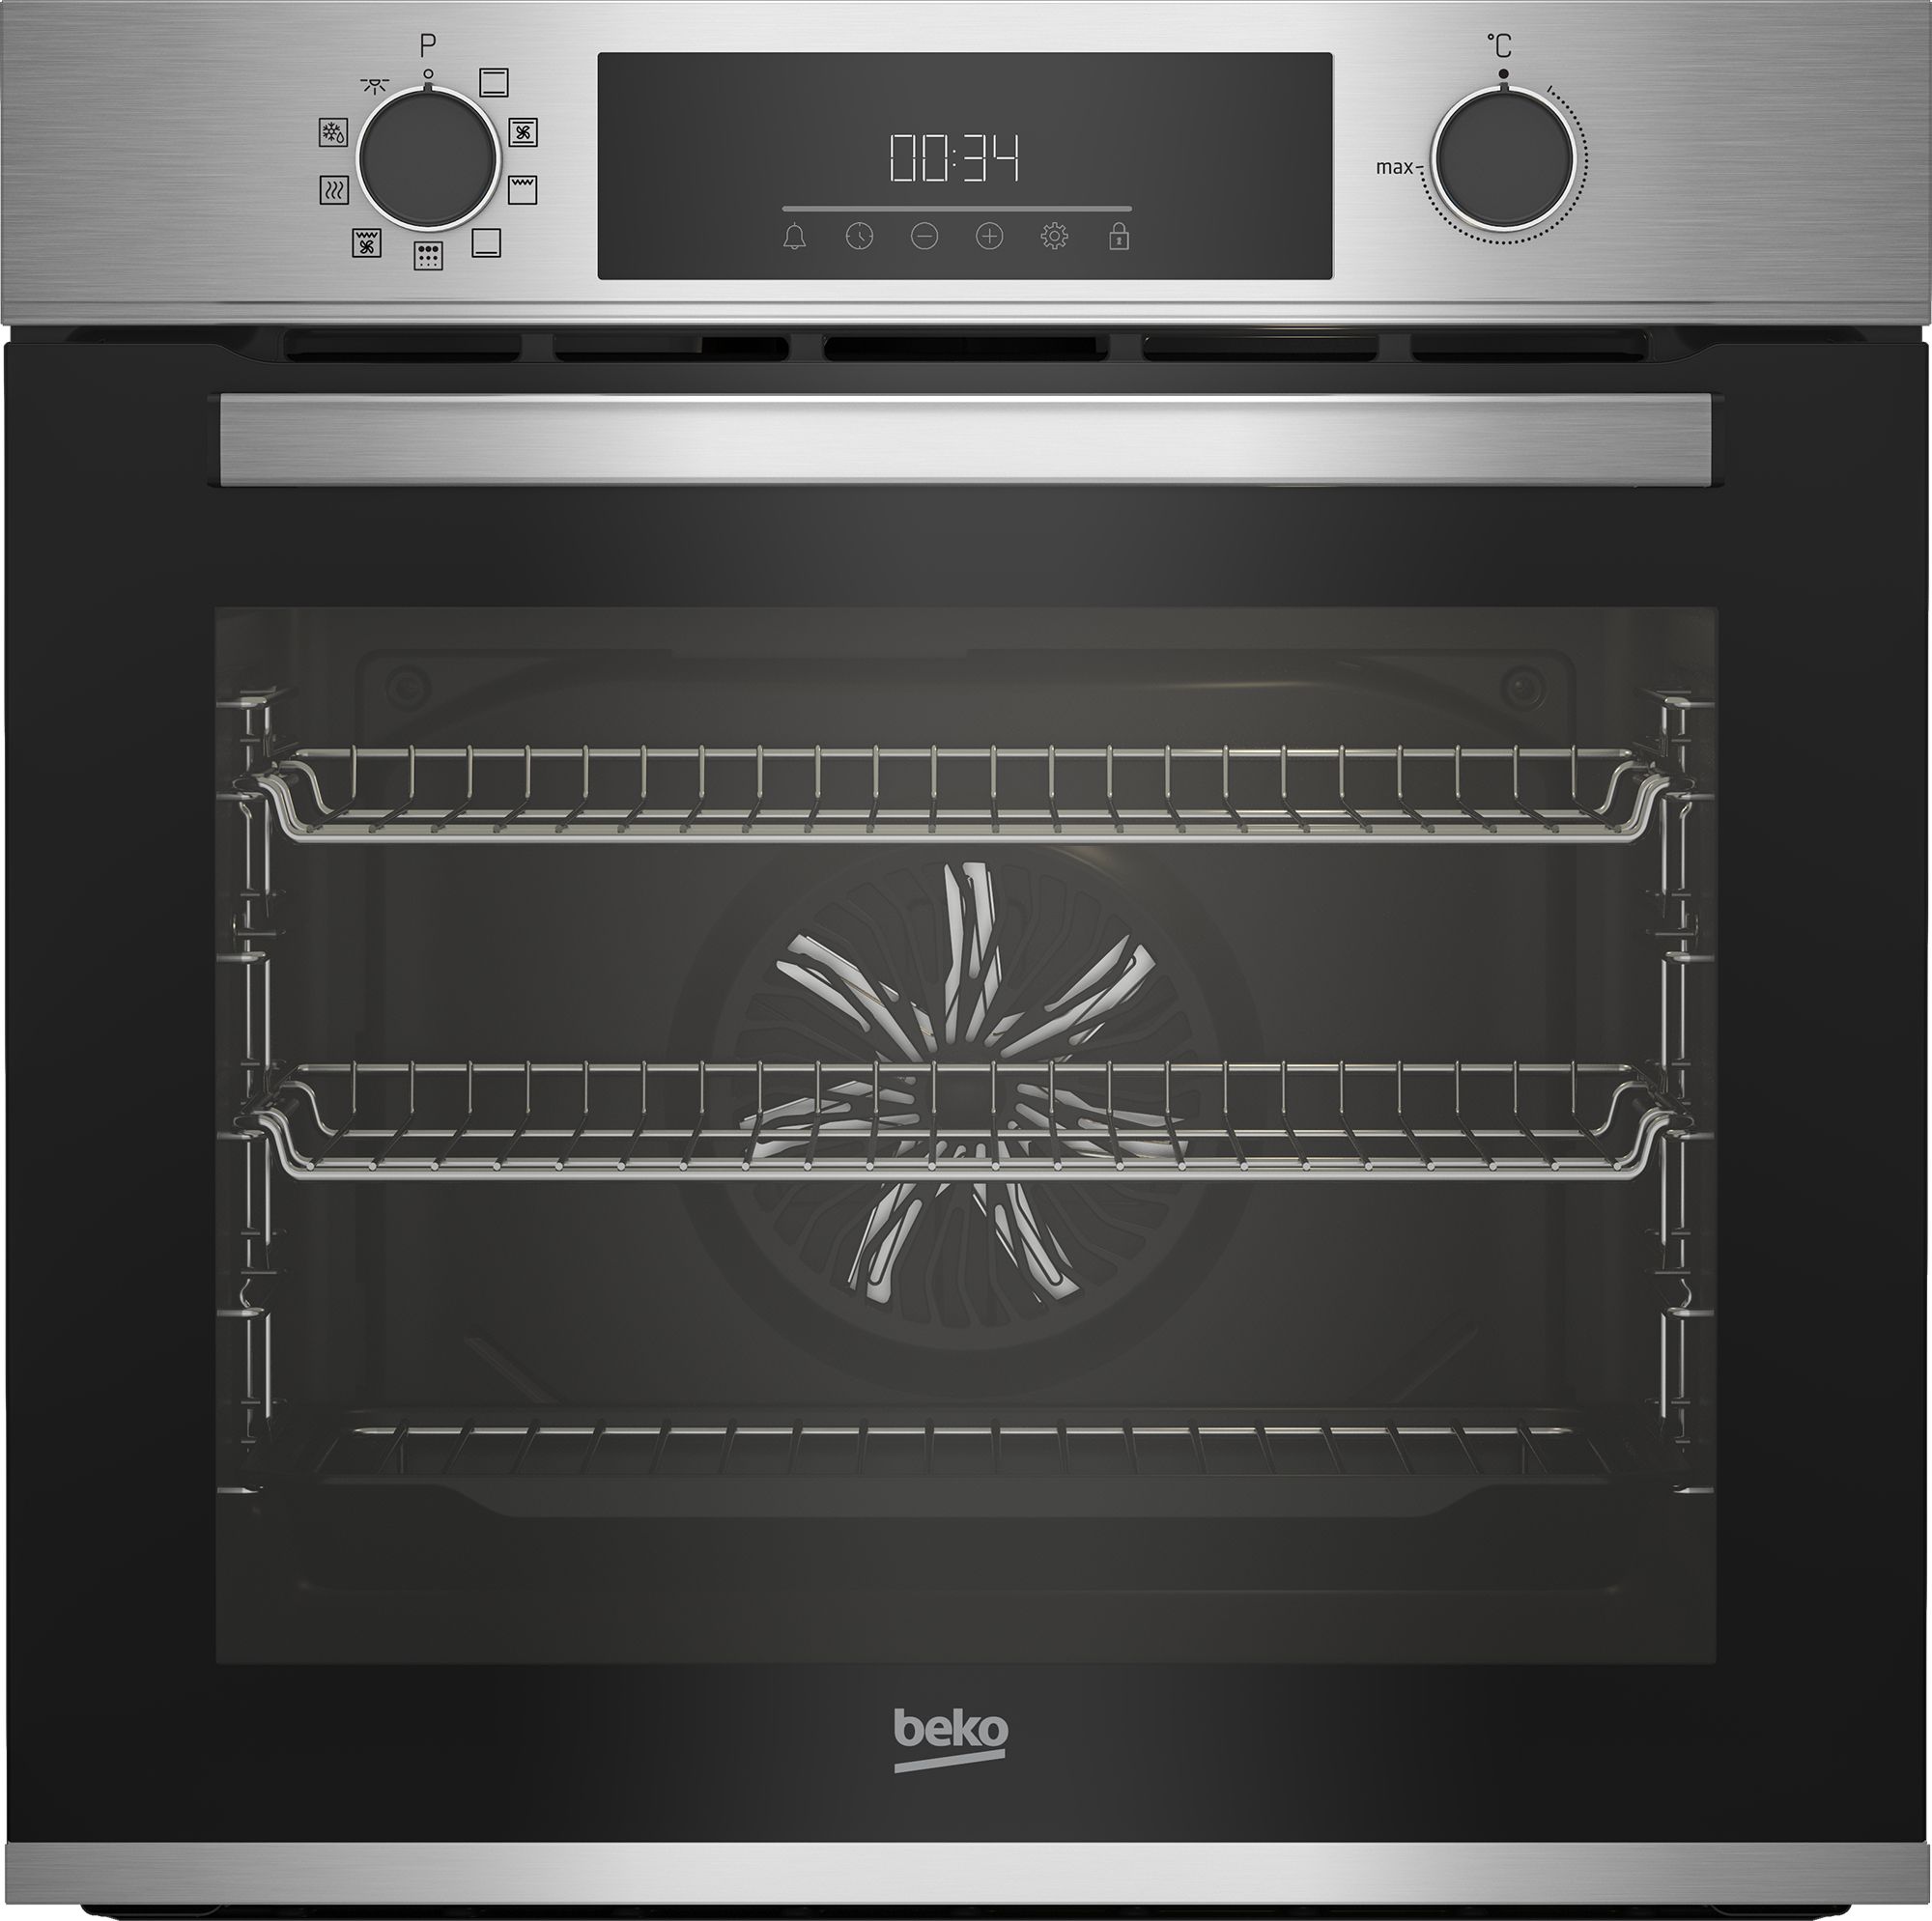 Beko BBIE12301XMP Built In Electric Single Oven - Stainless Steel - A Rated, Stainless Steel